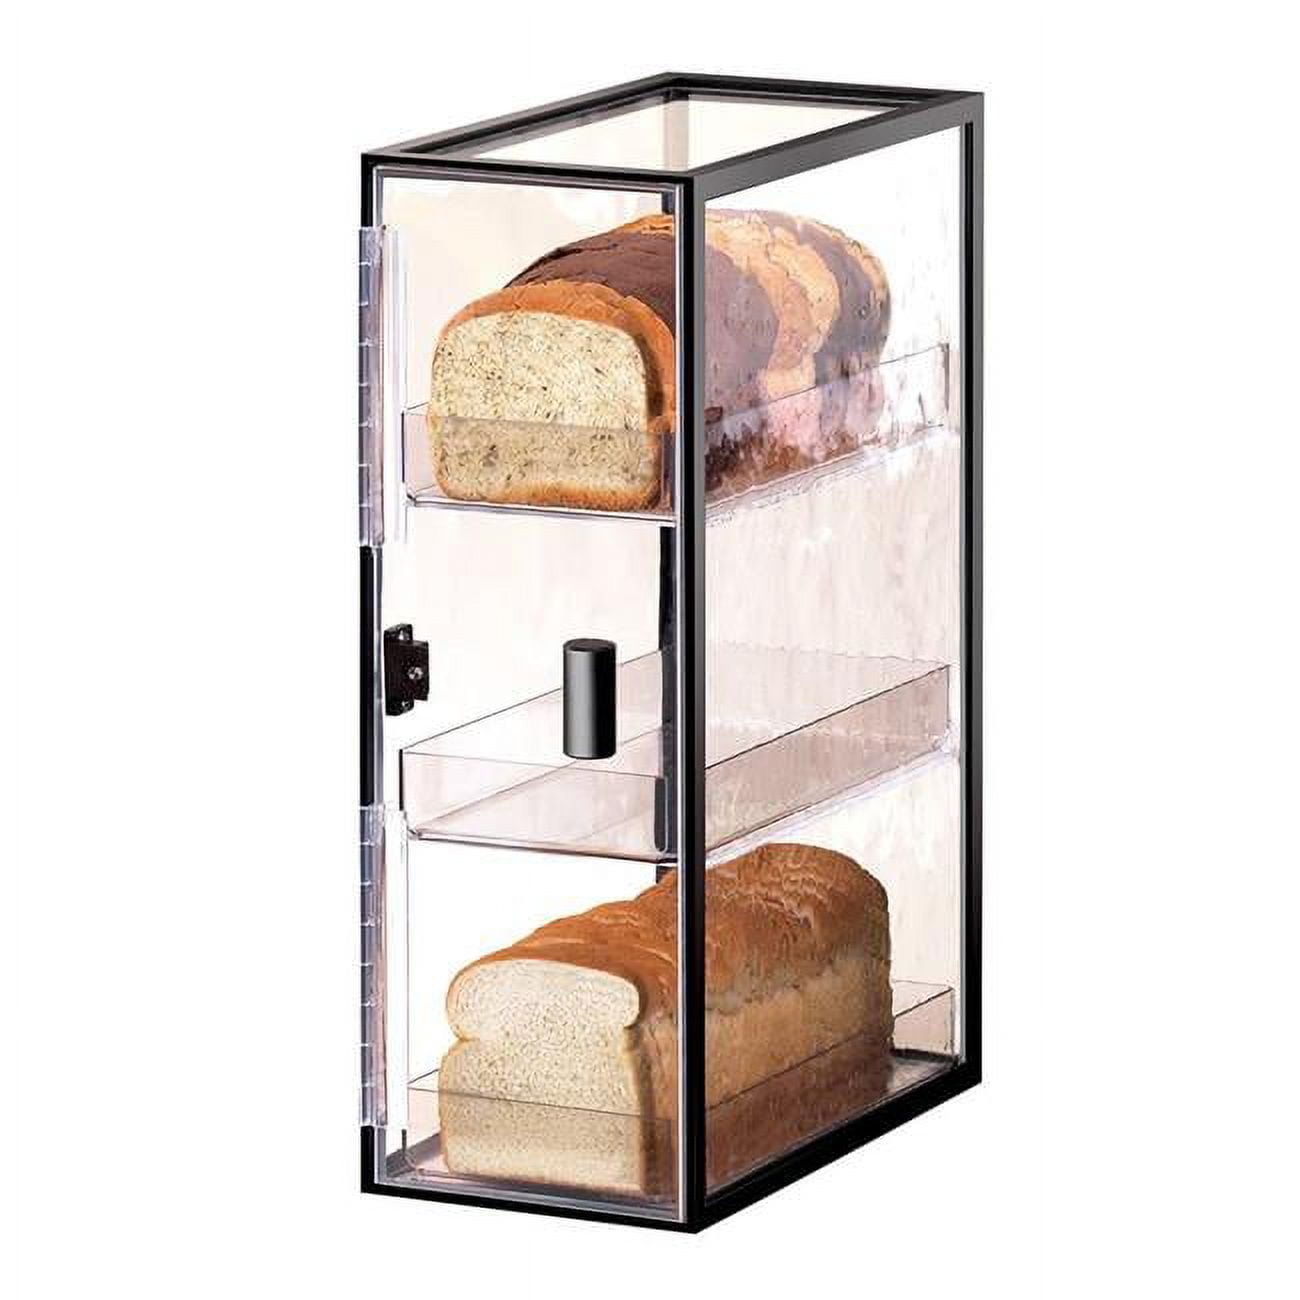 Picture of Cal Mil 1720-3 Iron 3-Tier Bread Case - 7 x 12.25 x 19.5 in.